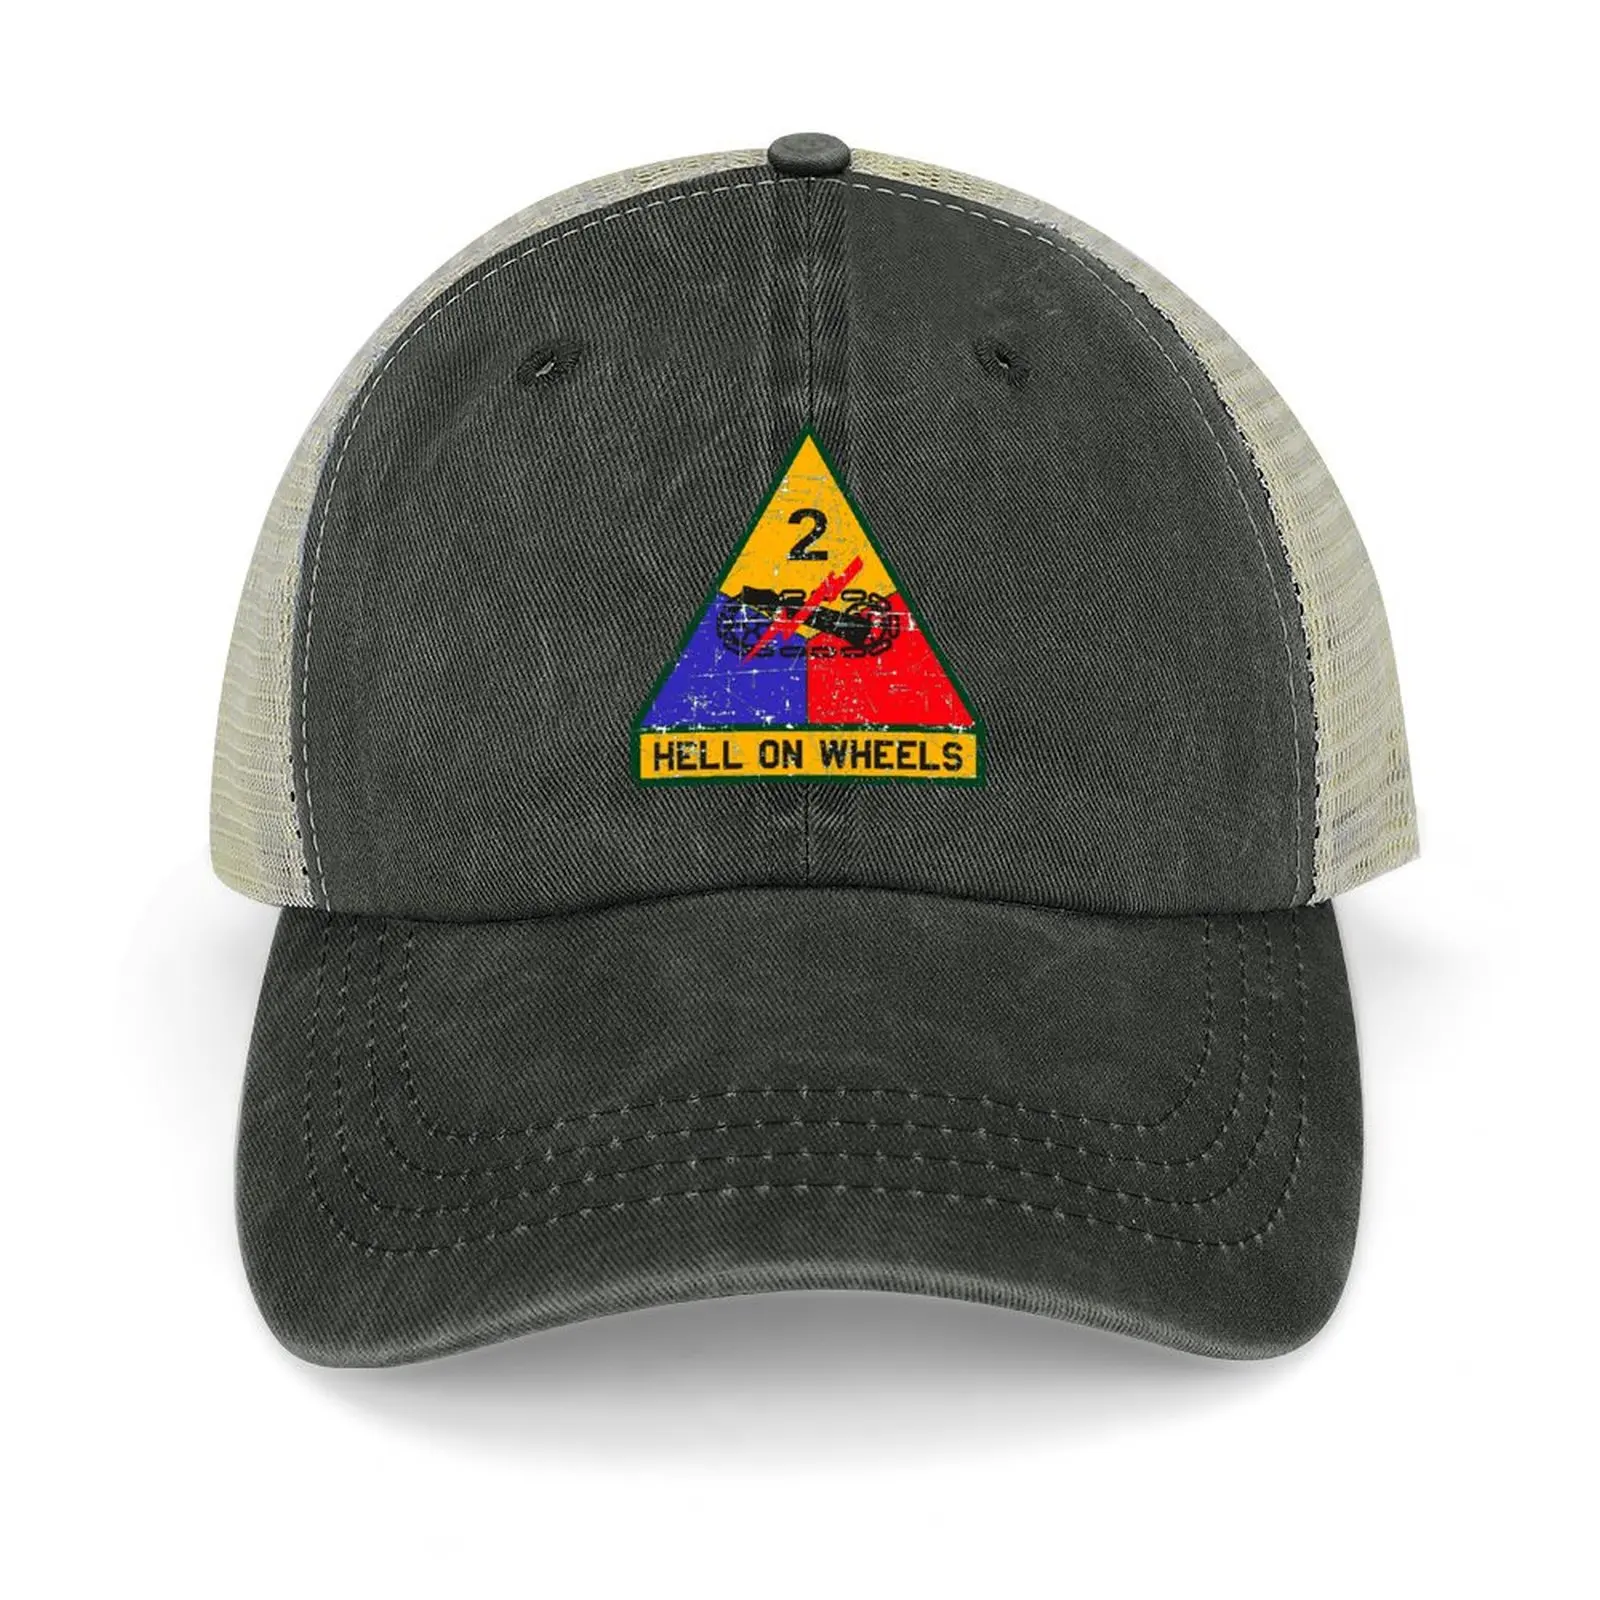 

US Army - The 2nd Armored Division, Hell on Wheels - Grunge Style Cowboy Hat sun hat Kids Hat Cosplay Women's Beach Visor Men's